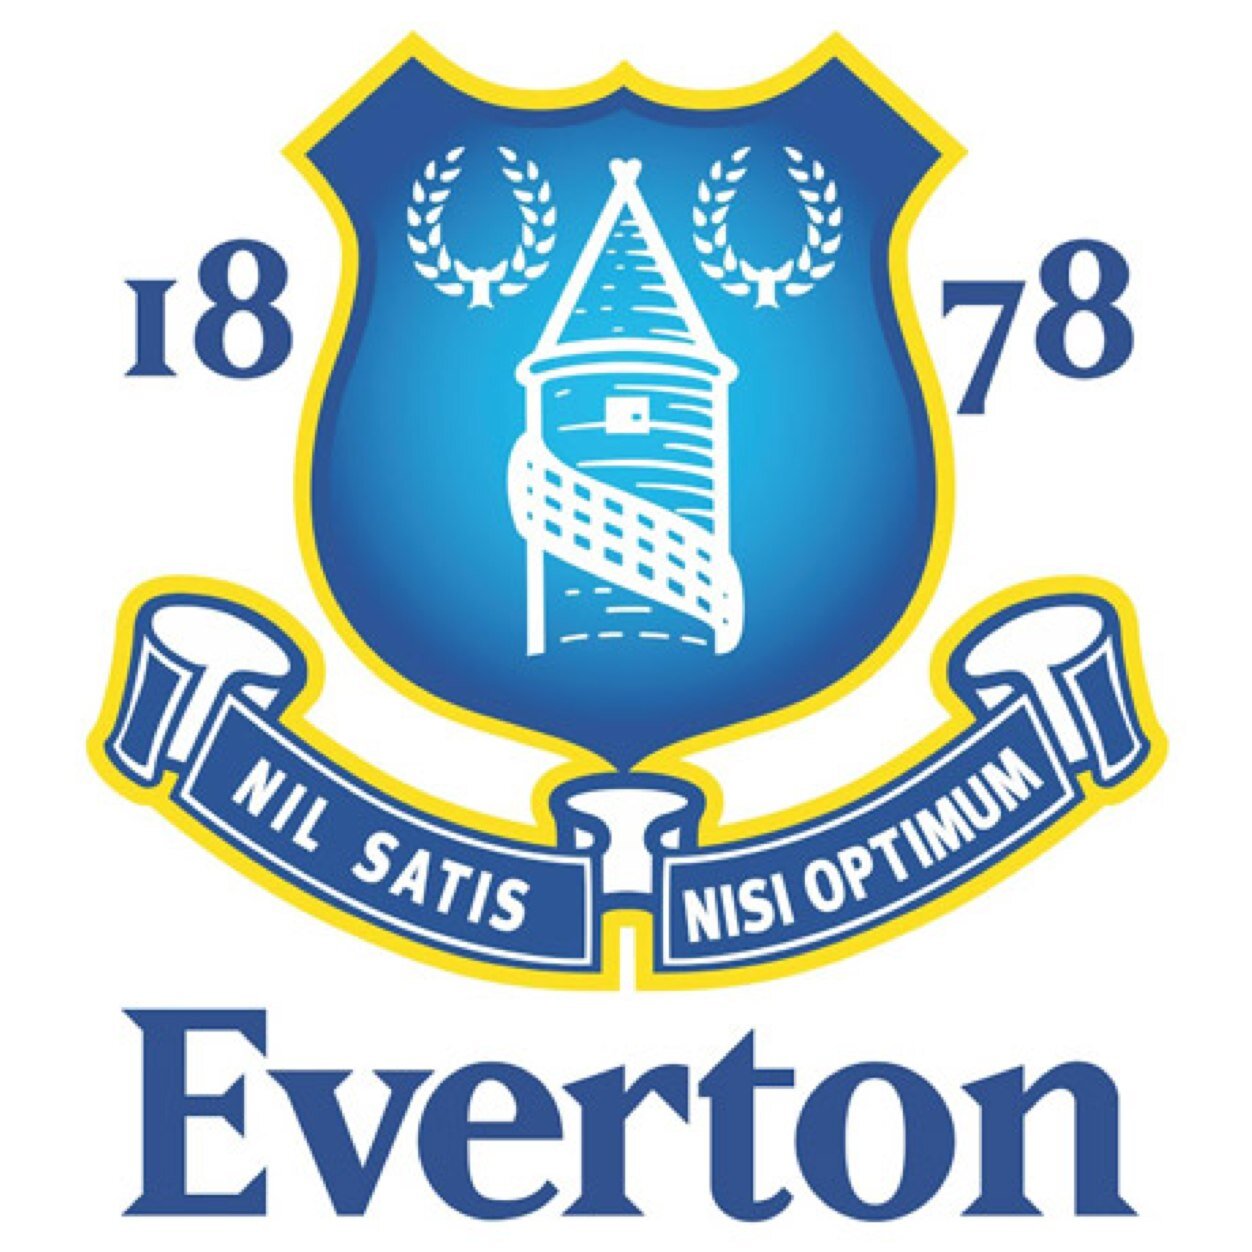 All the latest updates and news from our favourite merseyside club. Up the Toffees!!!!